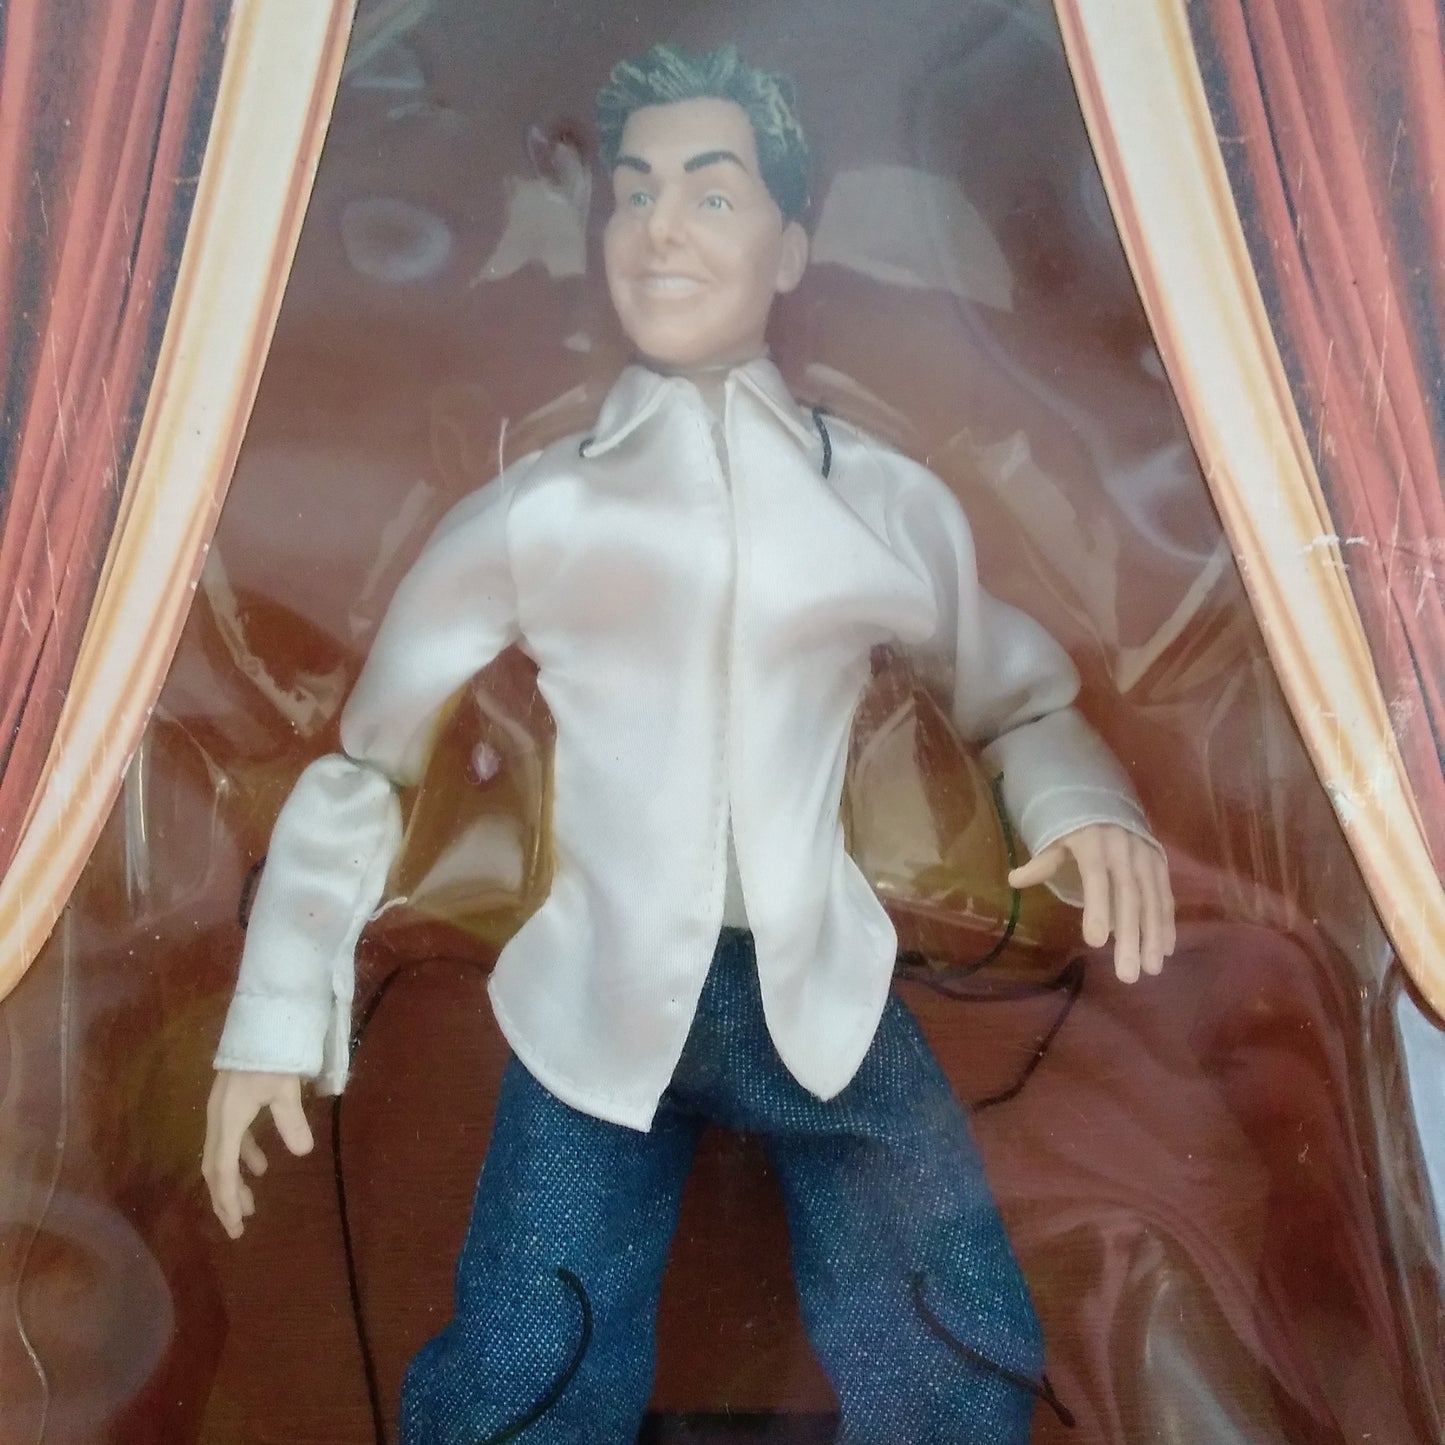 NIB - NSync Collectible Marionette - Lance Bass 10" Figure